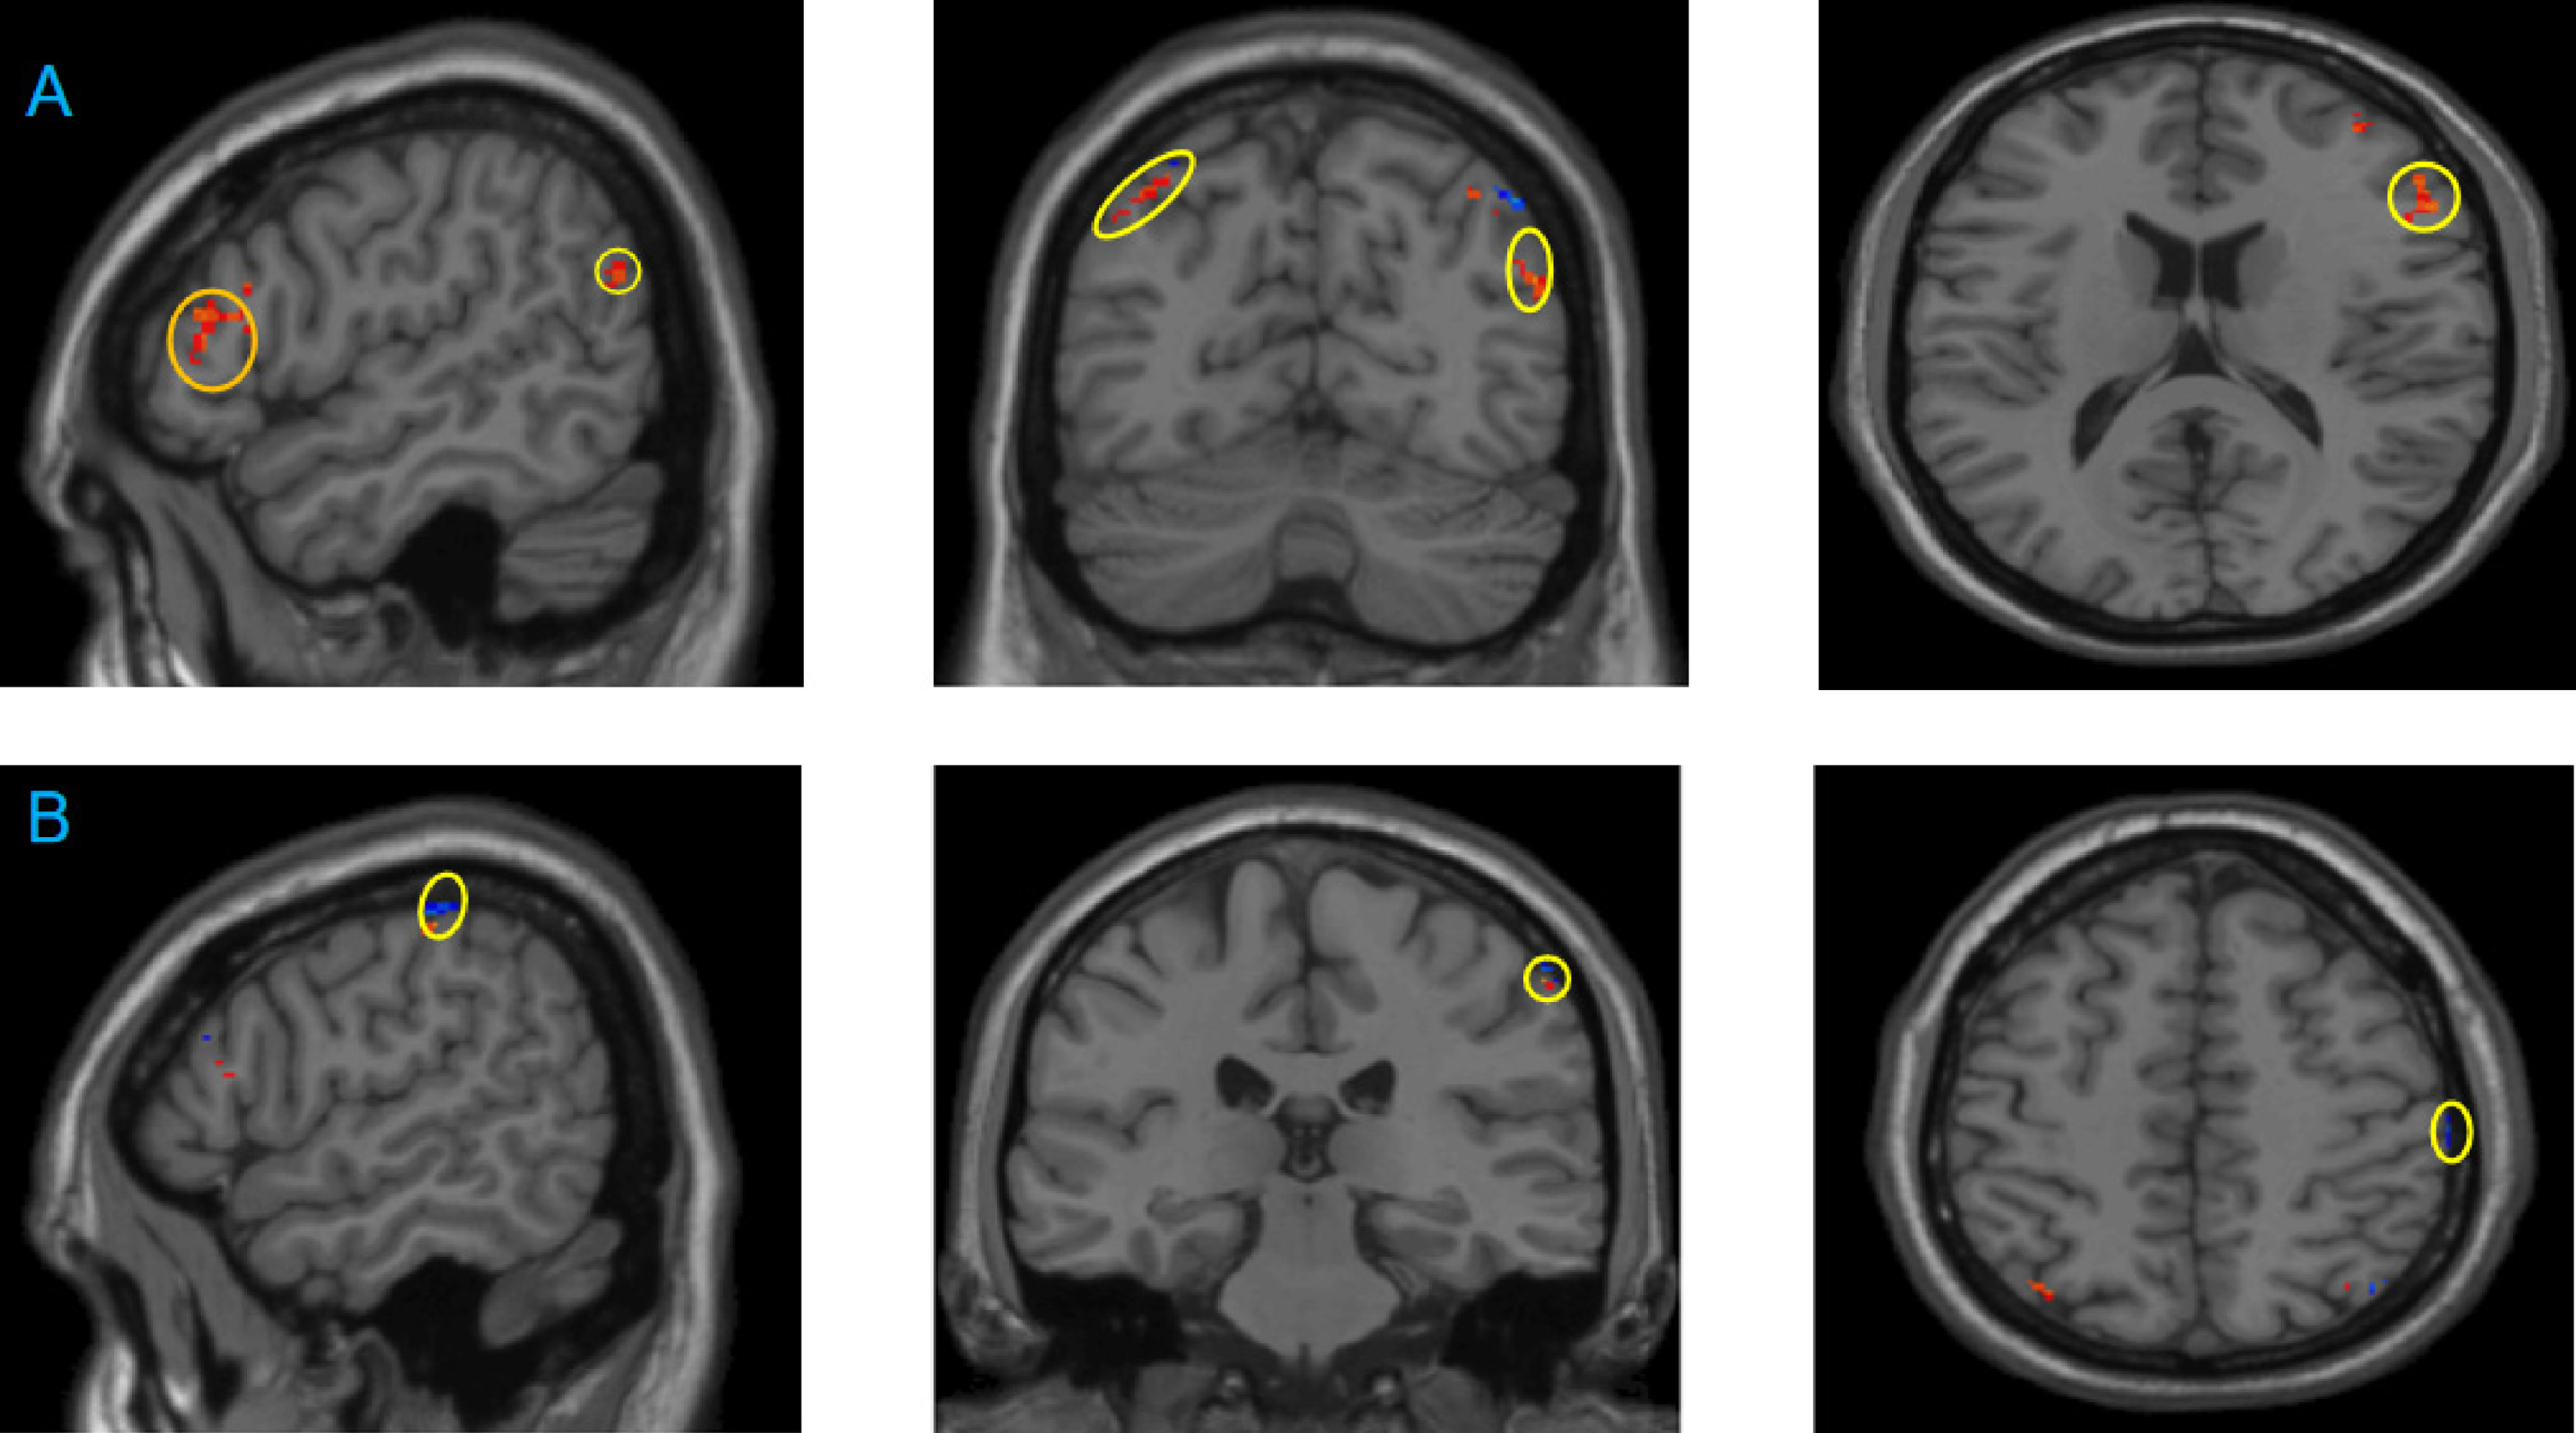 Difference of gray matter density between the Baduanjin (BDJ) group and usual physical activity (UPA) control group before and after intervention. A: Brain areas with increased gray matter volume before and after intervention in the BDJ group compared with the UPA group: Left superior temporal gyrus, medial temporal gyrus, right superior frontal gyrus, middle frontal gyrus, right medial frontal gyrus, right temporal medial gyrus, occipital medial lobe, left cingulate gyrus, left superior parietal gyrus, right inferior parietal gyrus, angular; B: right parietal lobe and posterior central gyrus showed decreased gray matter volume in the BDJ group compared with the UPA group.